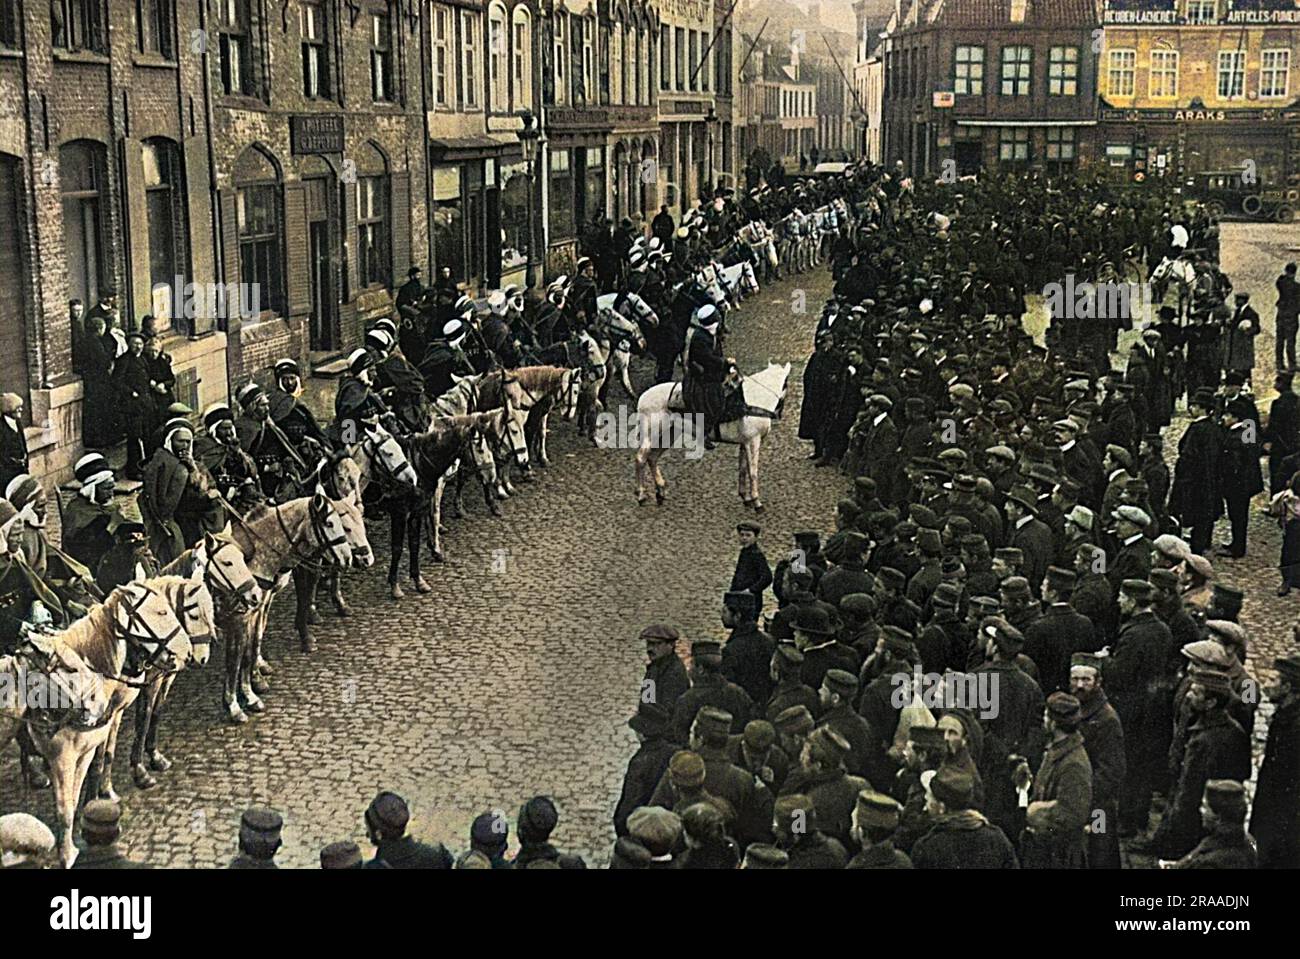 French Algerian cavalry - spahis drawn up in the market square at Furnes, West Flanders, Belgium, November 1914. Belgian people taking a keen interest.     Date: 1914 Stock Photo